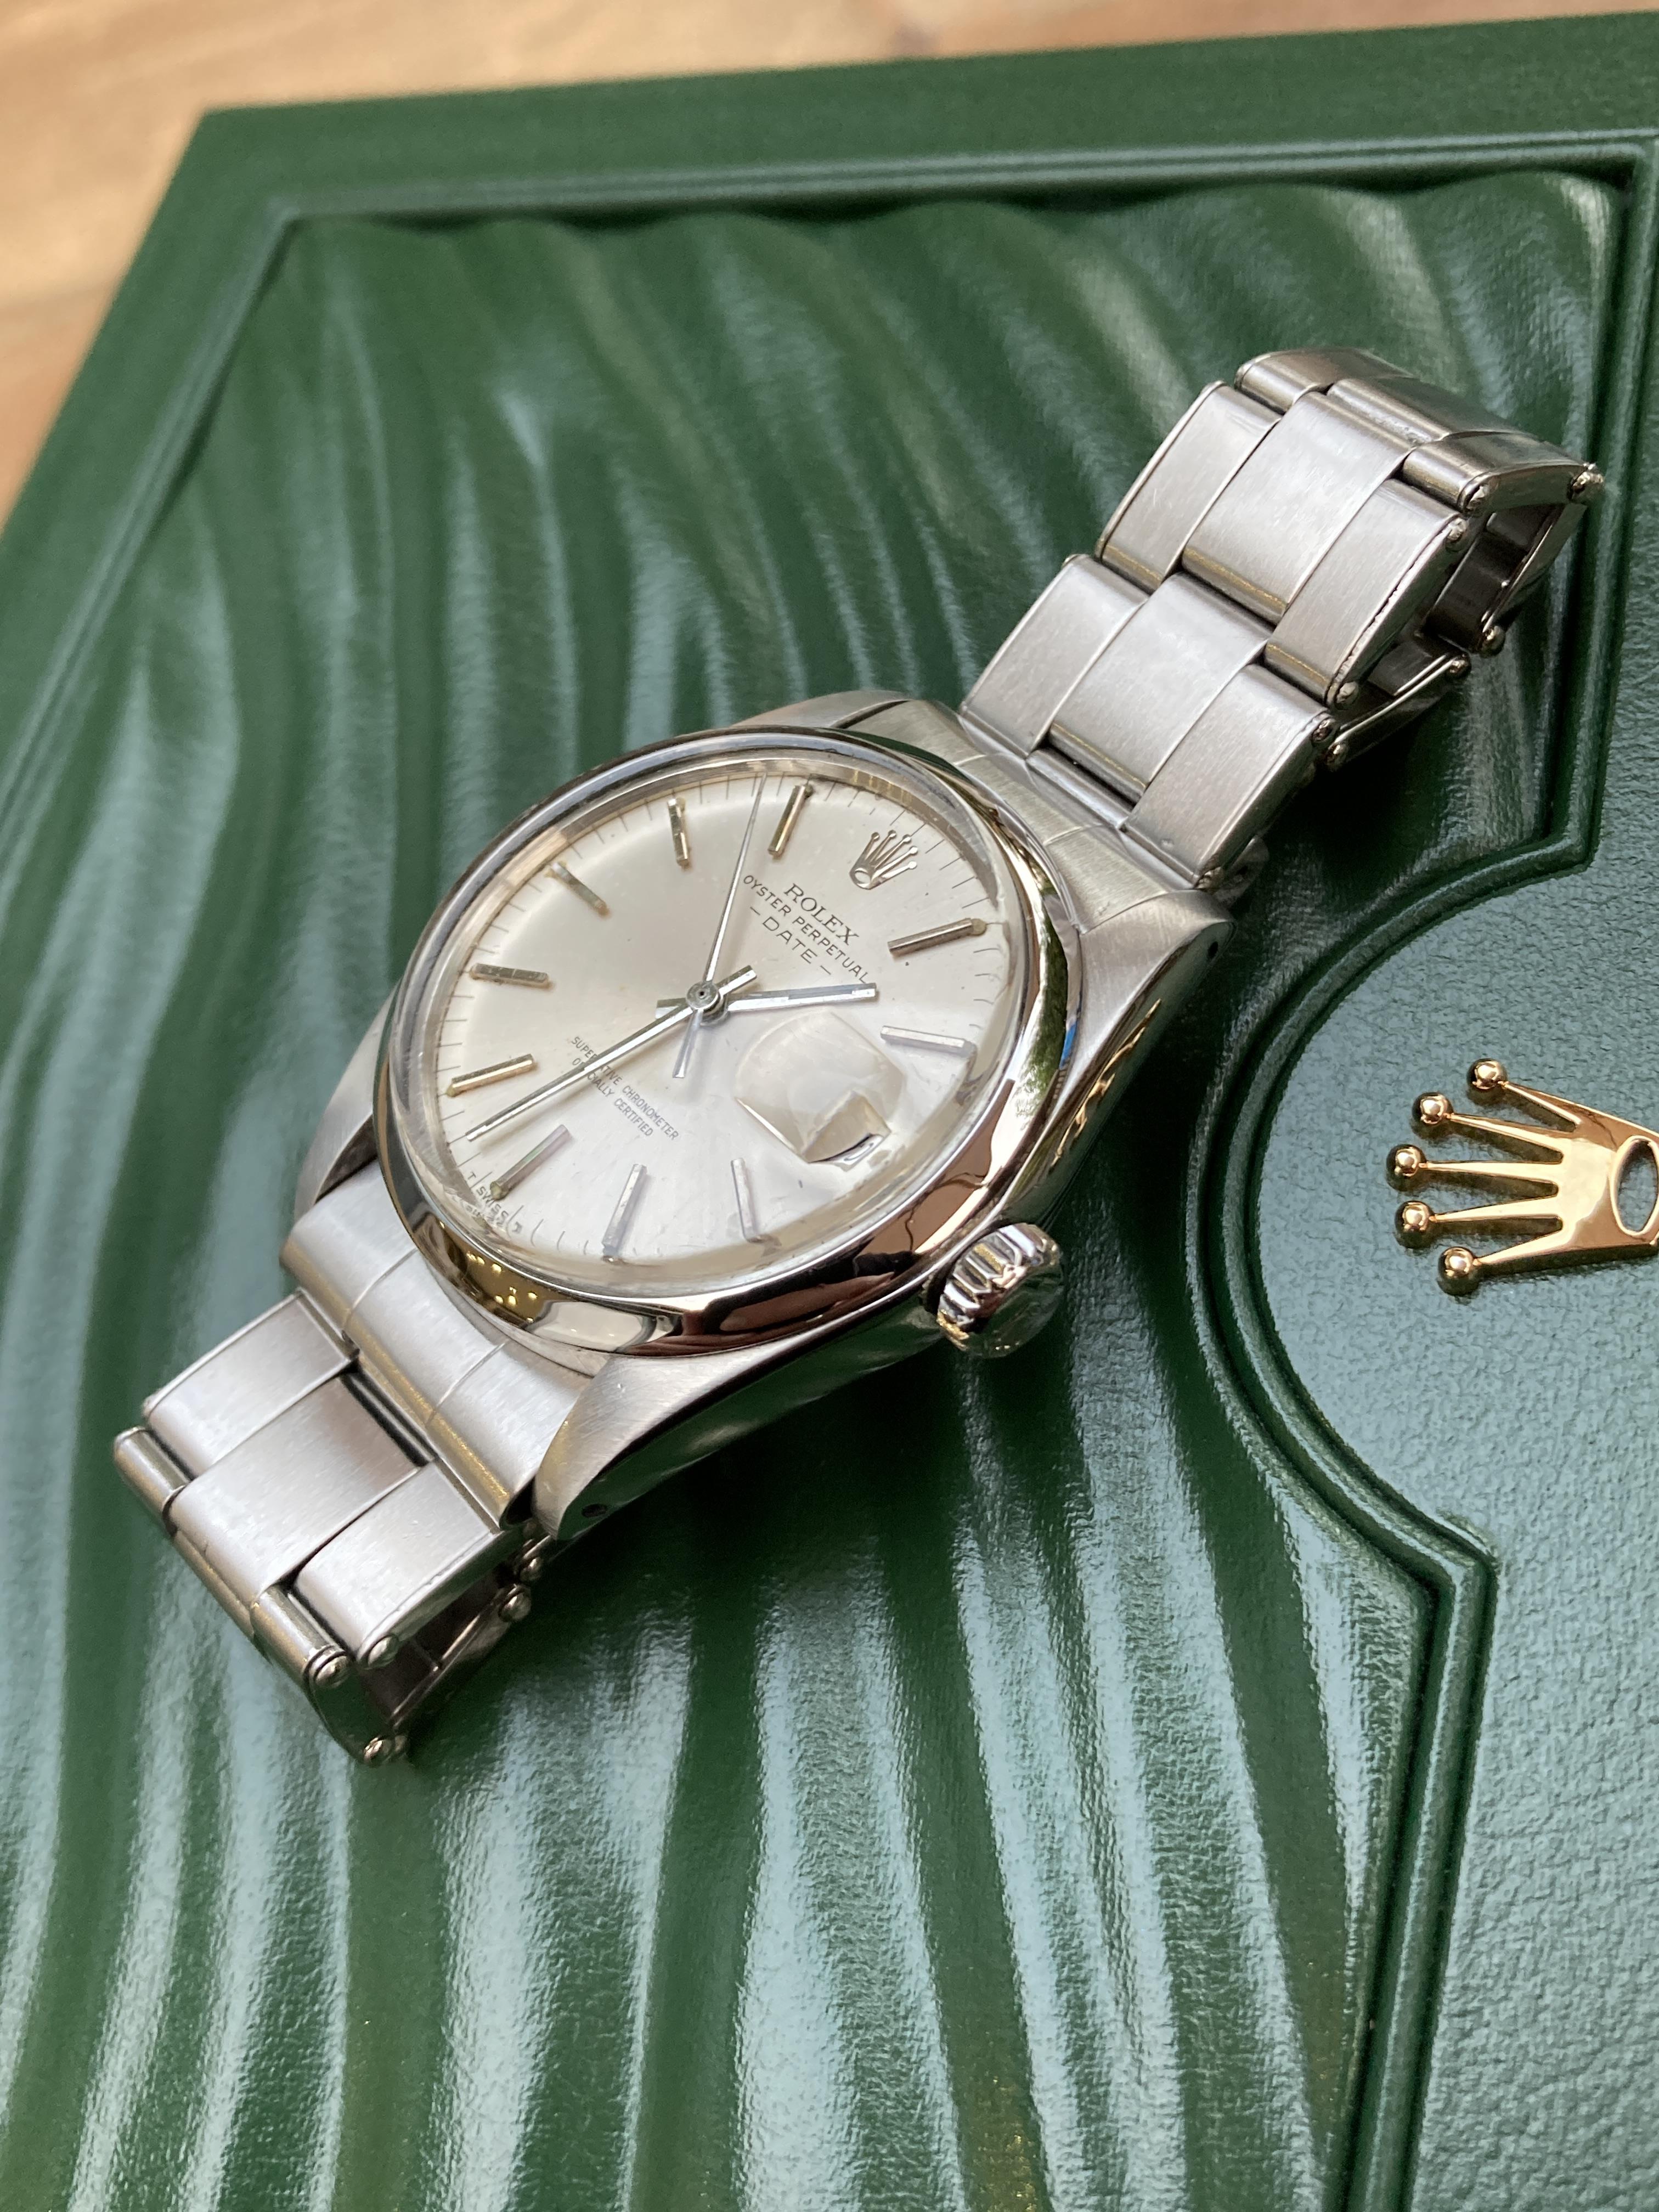 ROLEX OYSTER PERPETUAL DATE 34MM, STAINLESS STEEL, SILVER DIAL - BOX NOT INCLUDED - Image 3 of 4